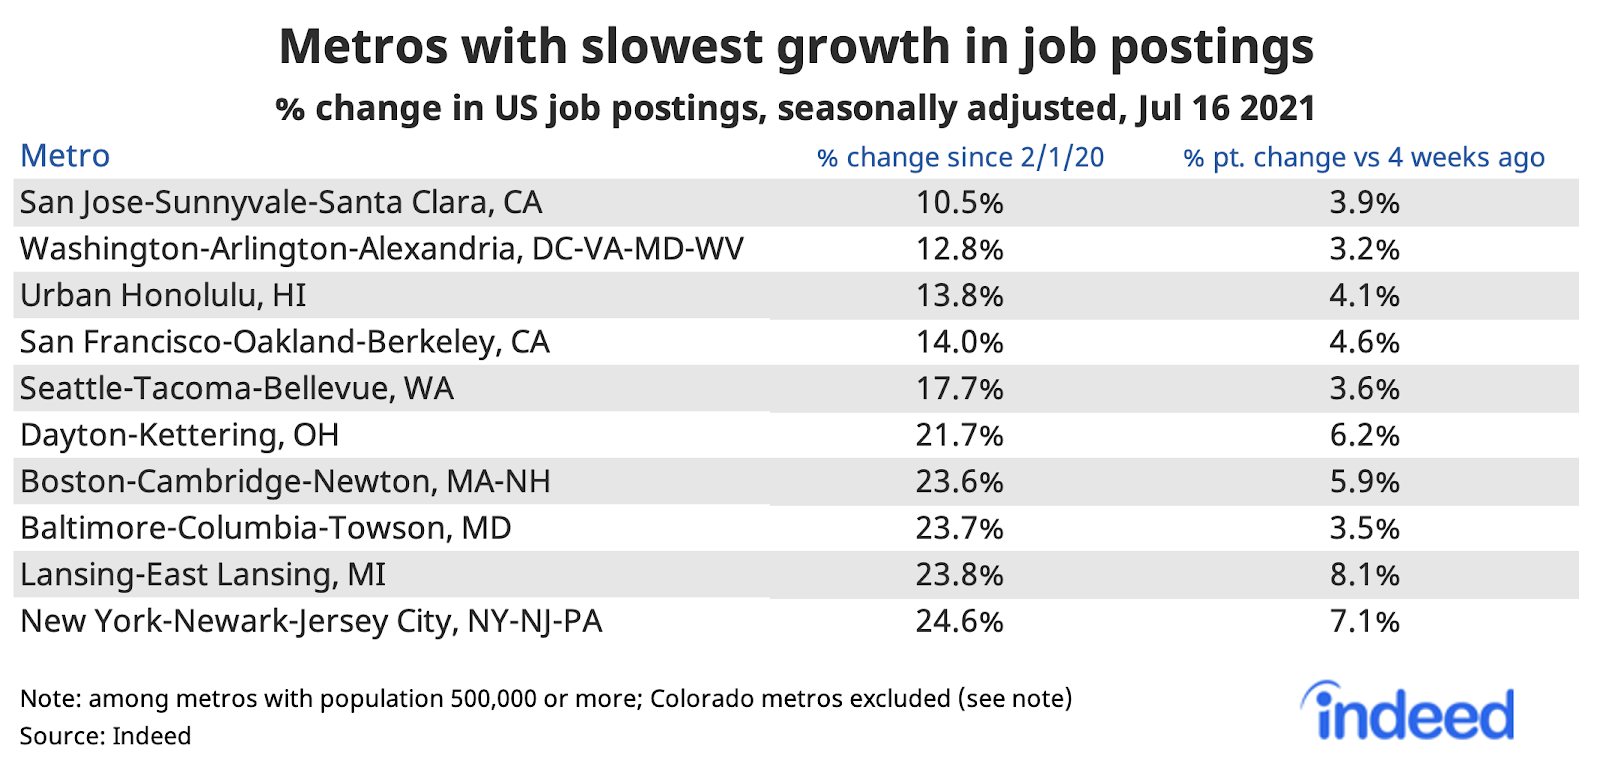 Table titled “Metros with declines or slowest growth in job postings.”